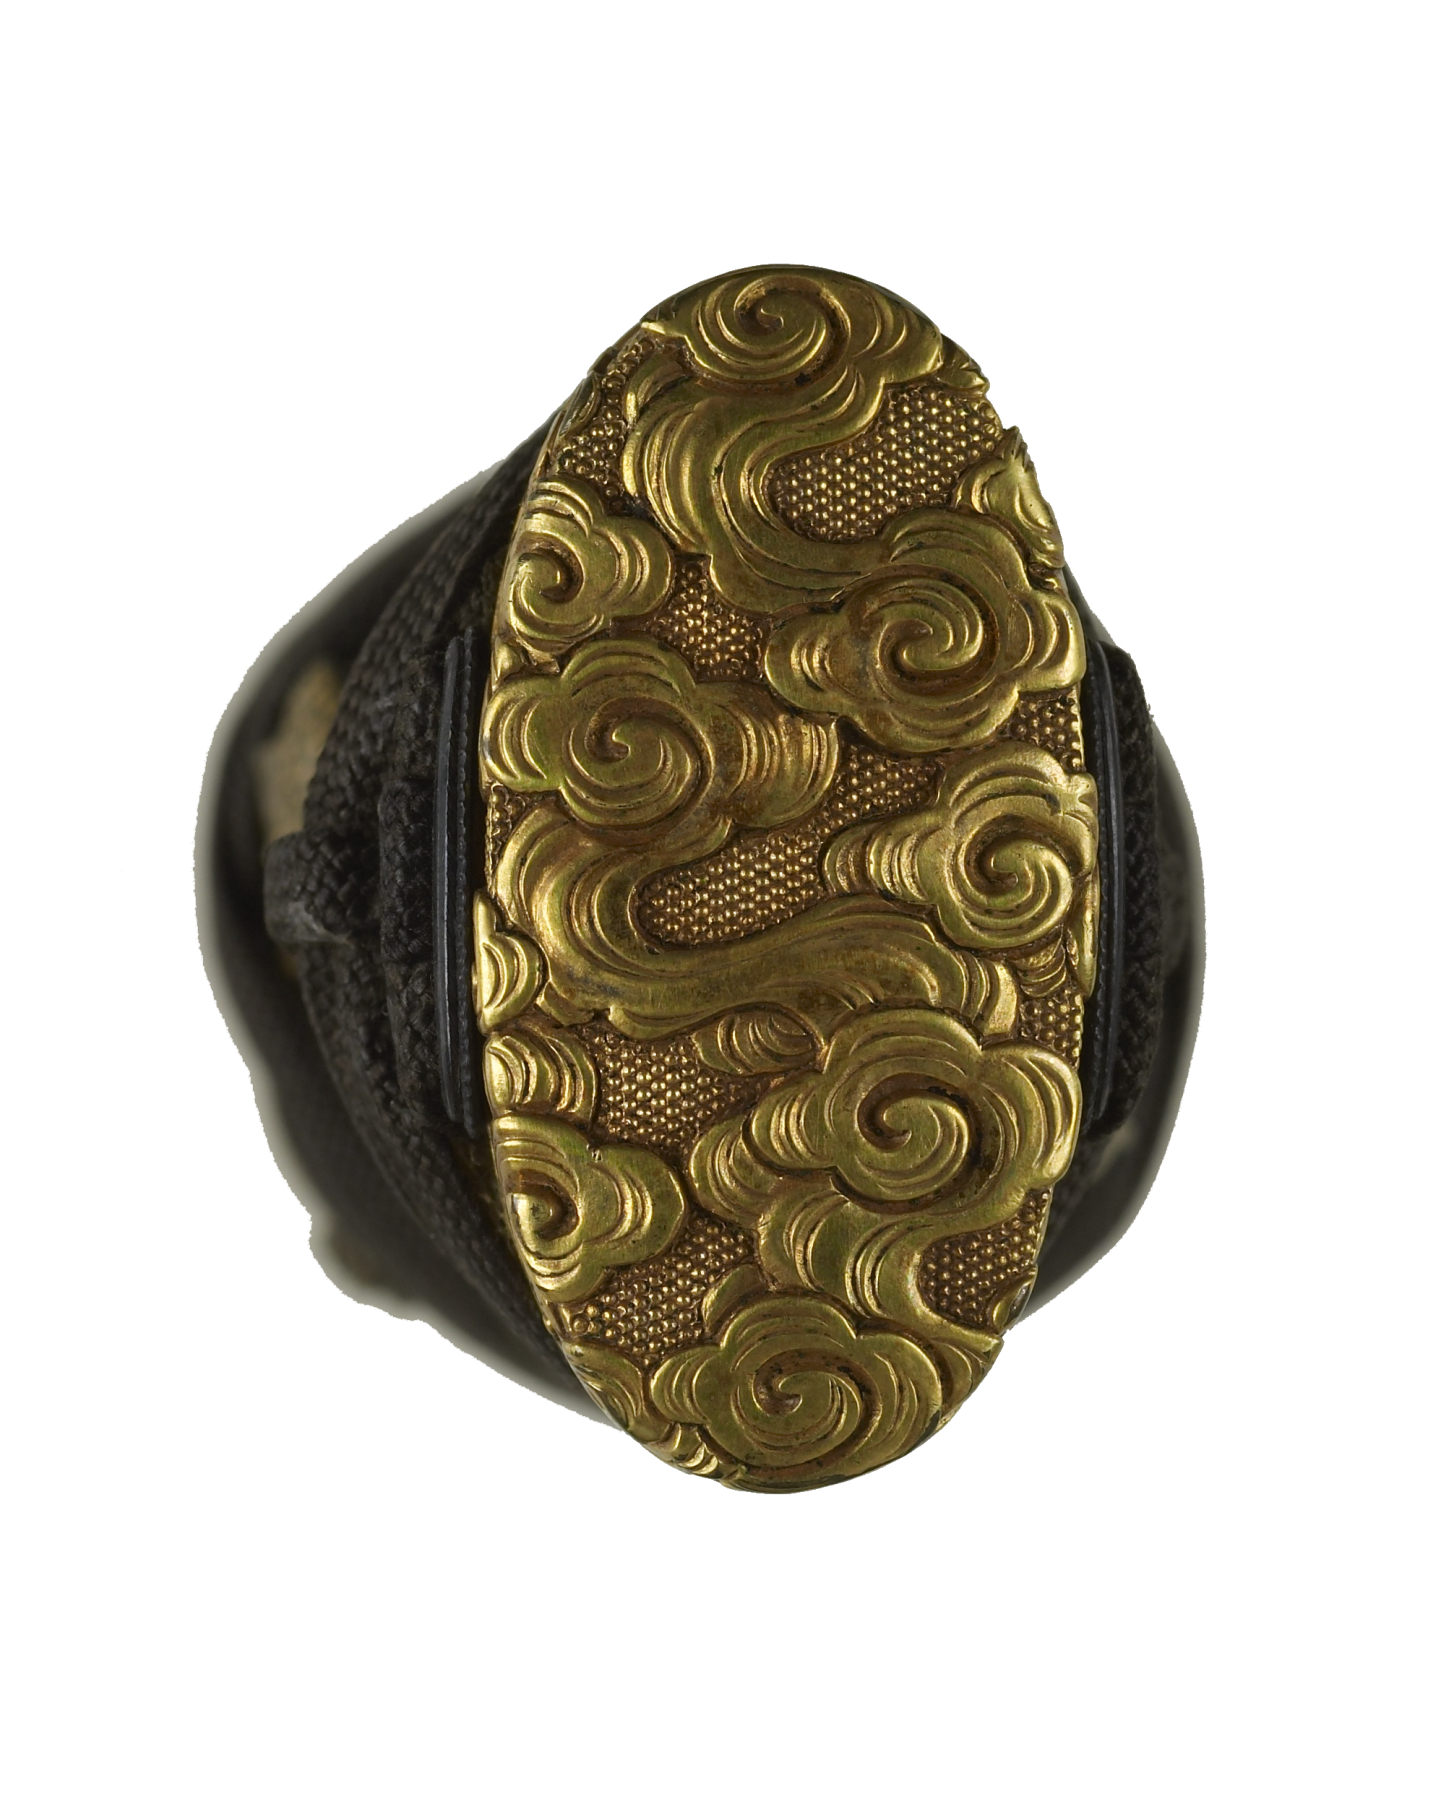 Image for Tsuka with Clouds and Chinese Immortals